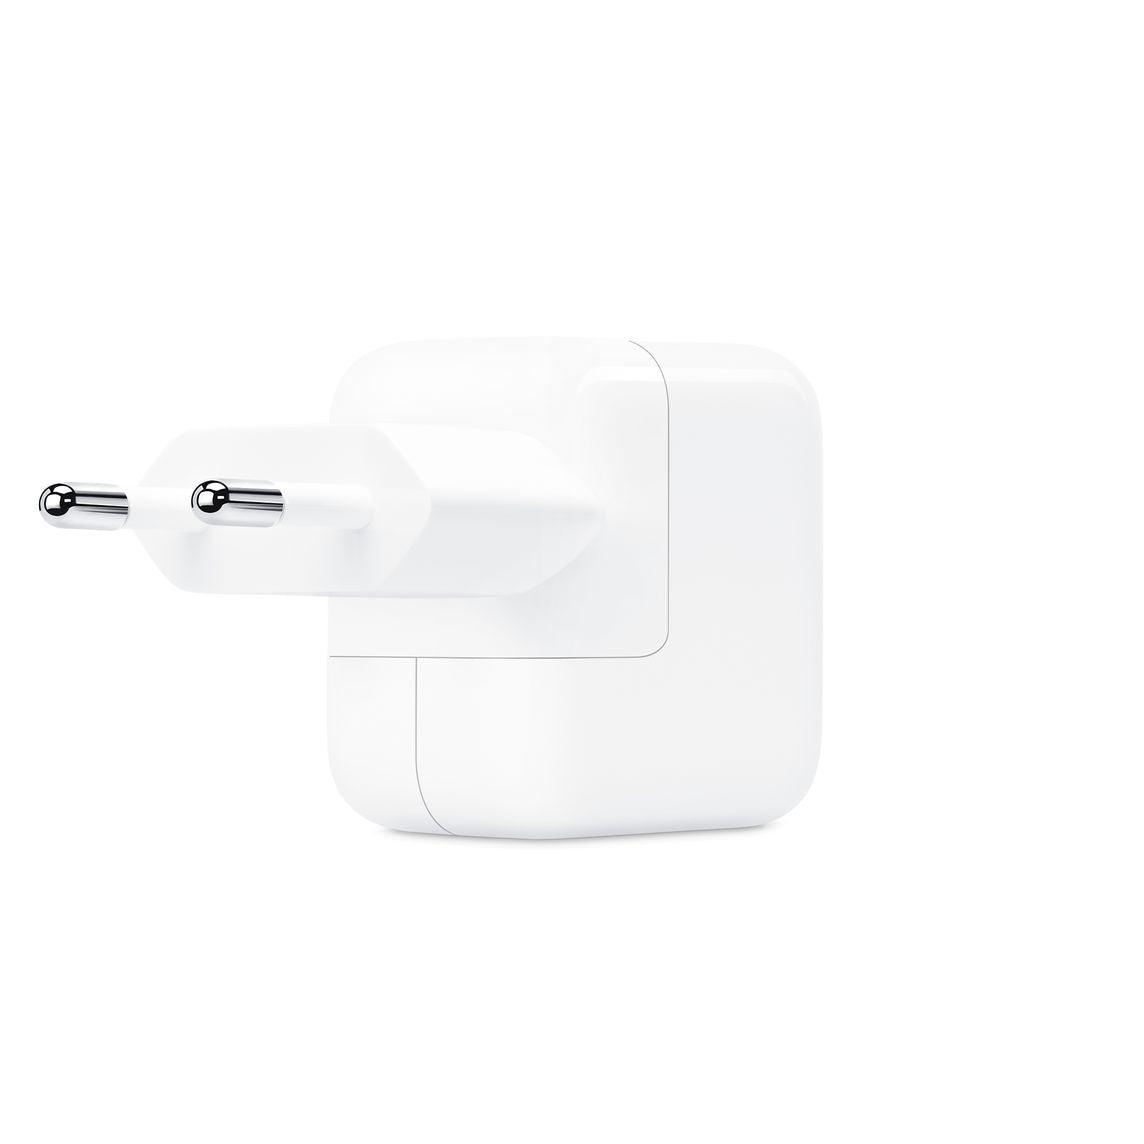 Apple 12W USB Power Adapter - Grab Your Gadget